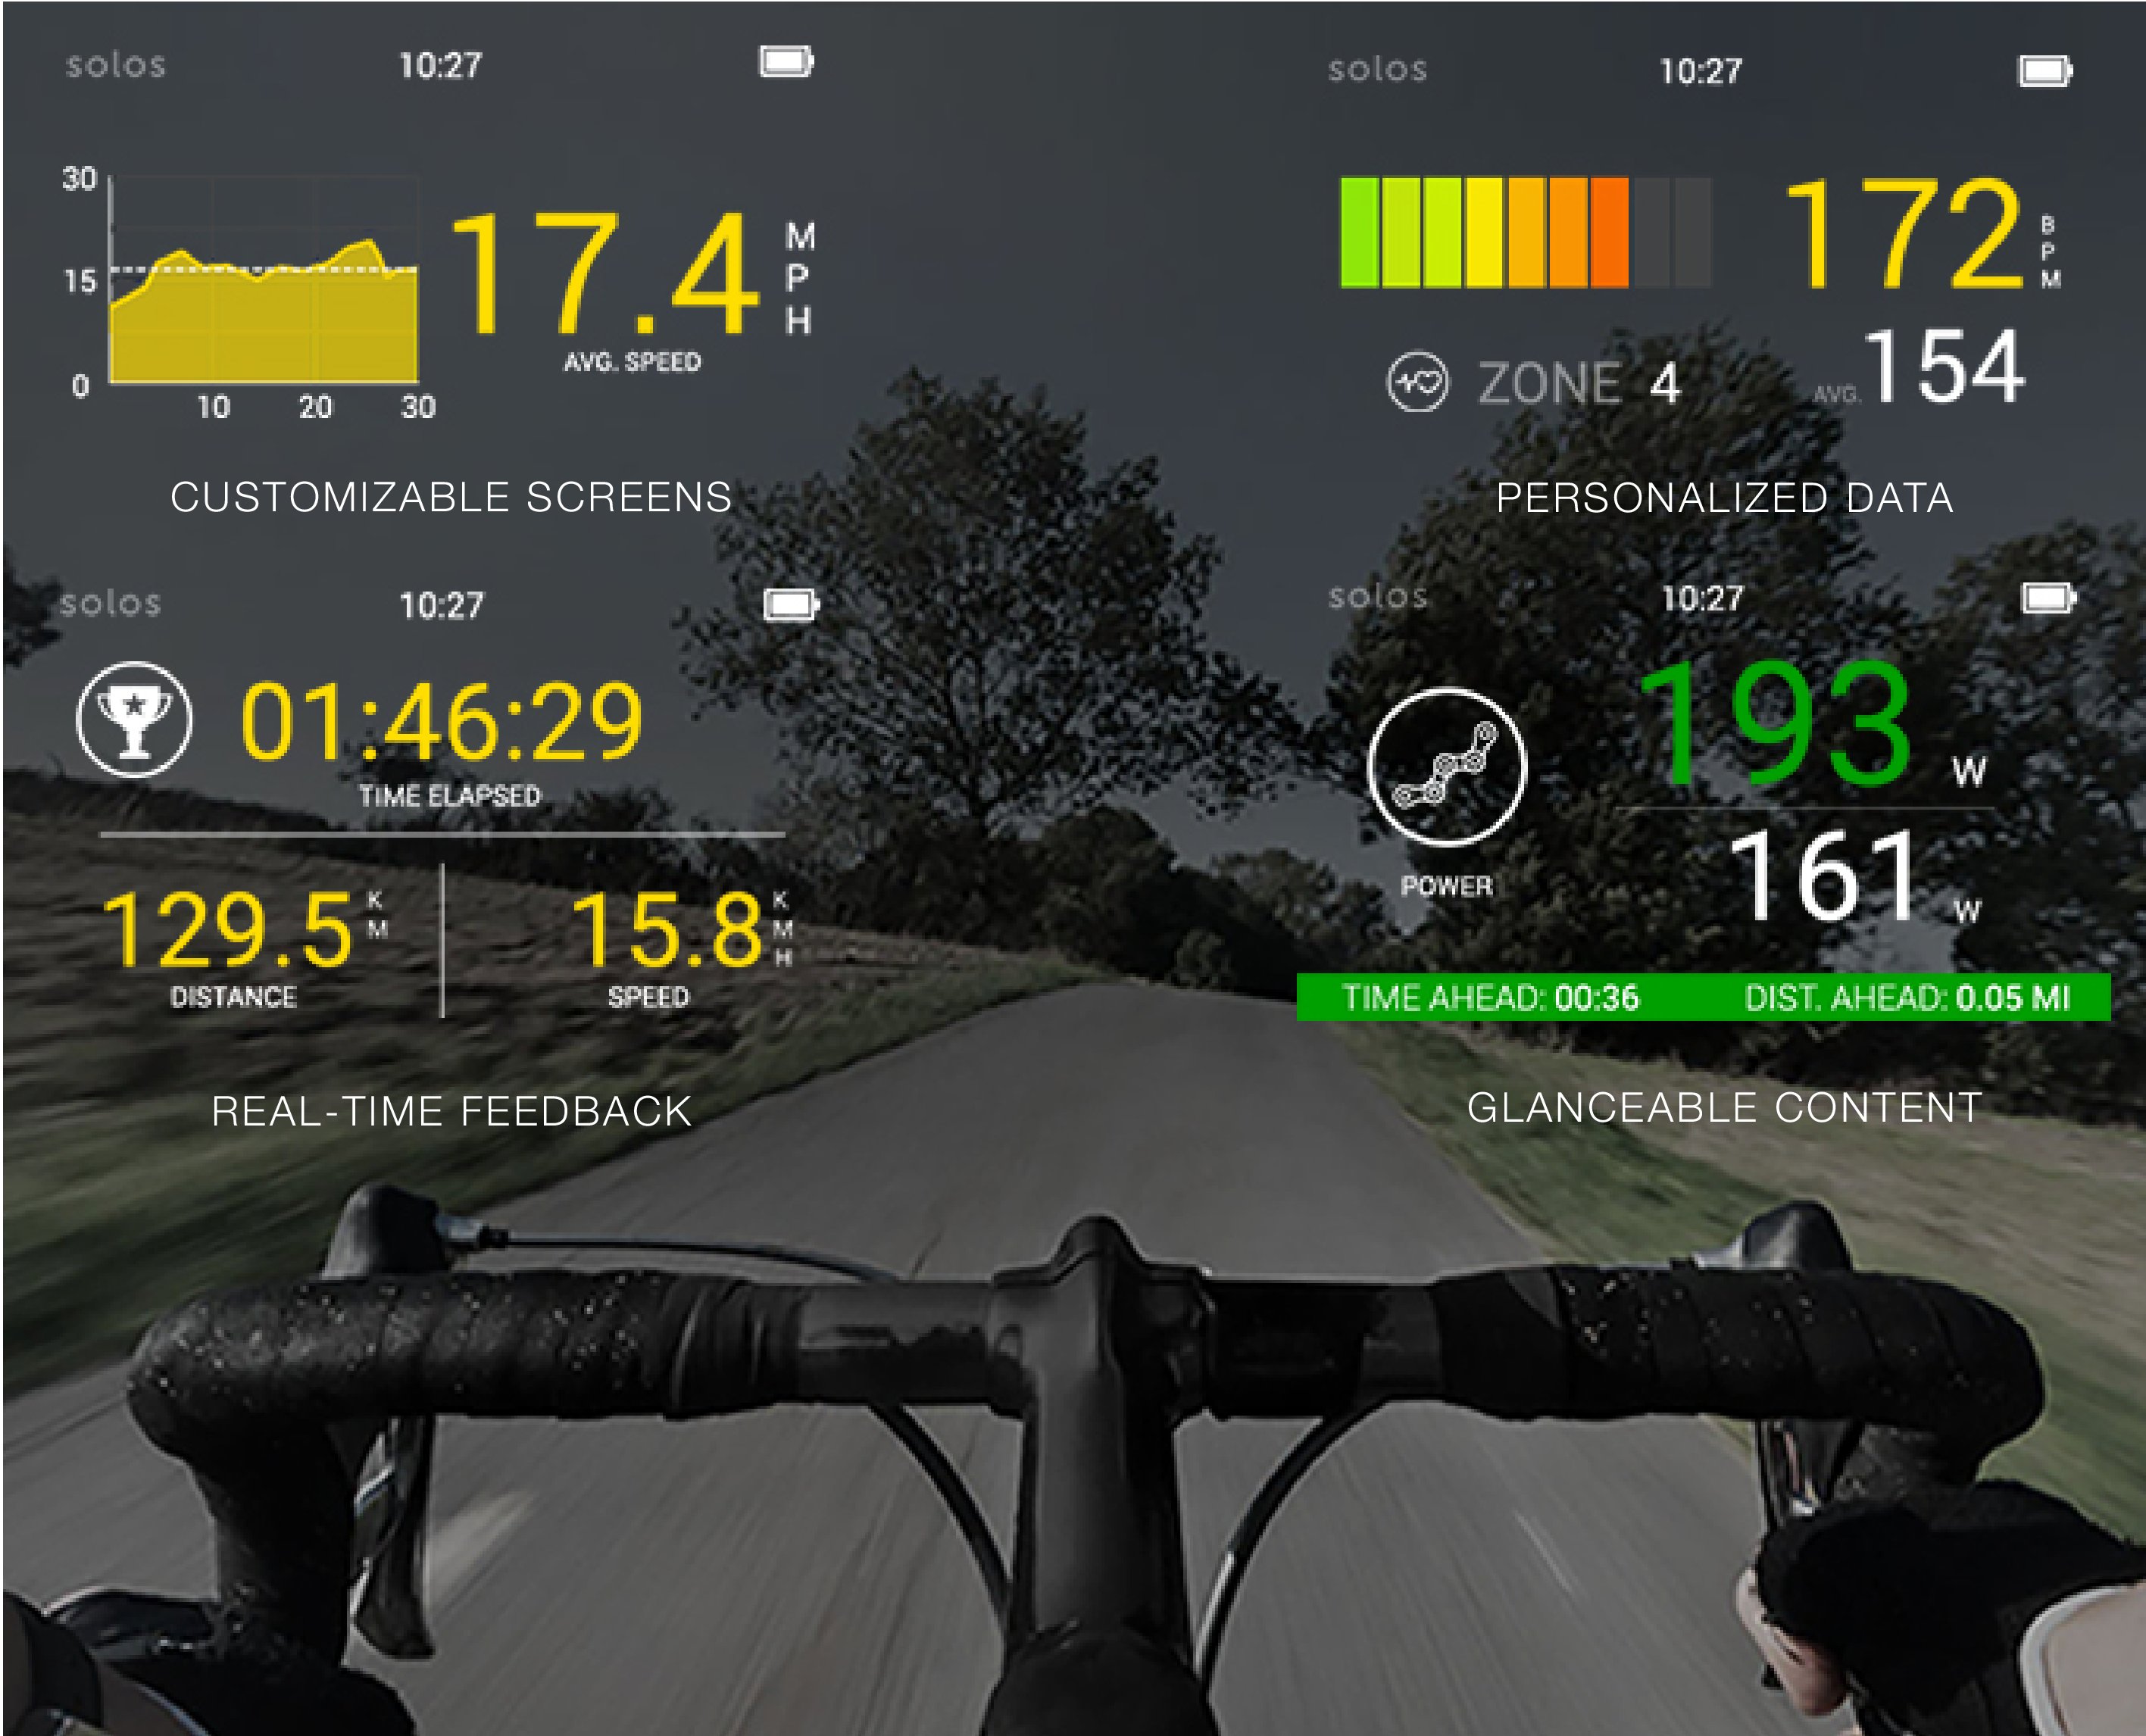 Head up display on Solos smart sunglasses for cyclists to track data from wearables.